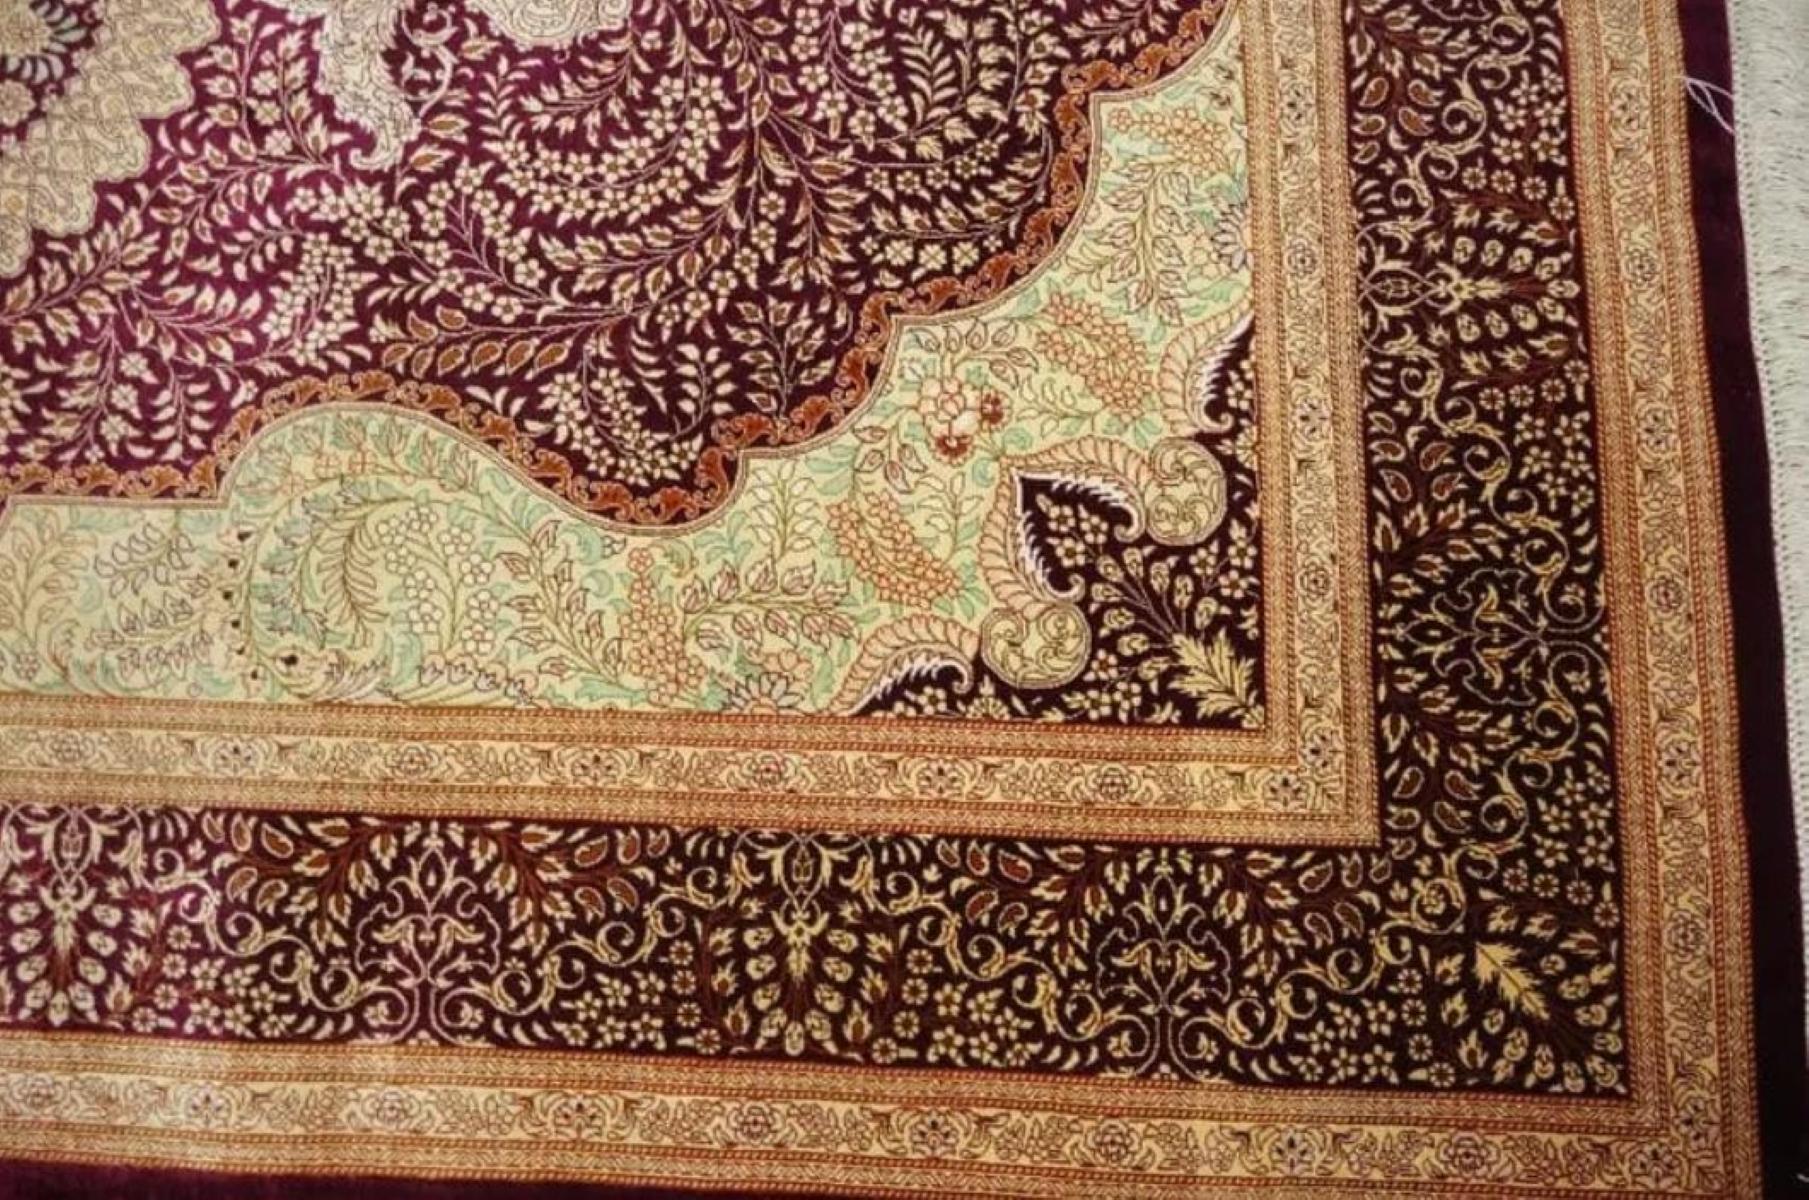 Very fine Persian Rug Qum 800 Knots per inch, Size 6.6 x 4.2  Silk and Silk foundation. Around 3,000,000 knots tied by hand one by one. It takes 2 years to complete this piece of art.